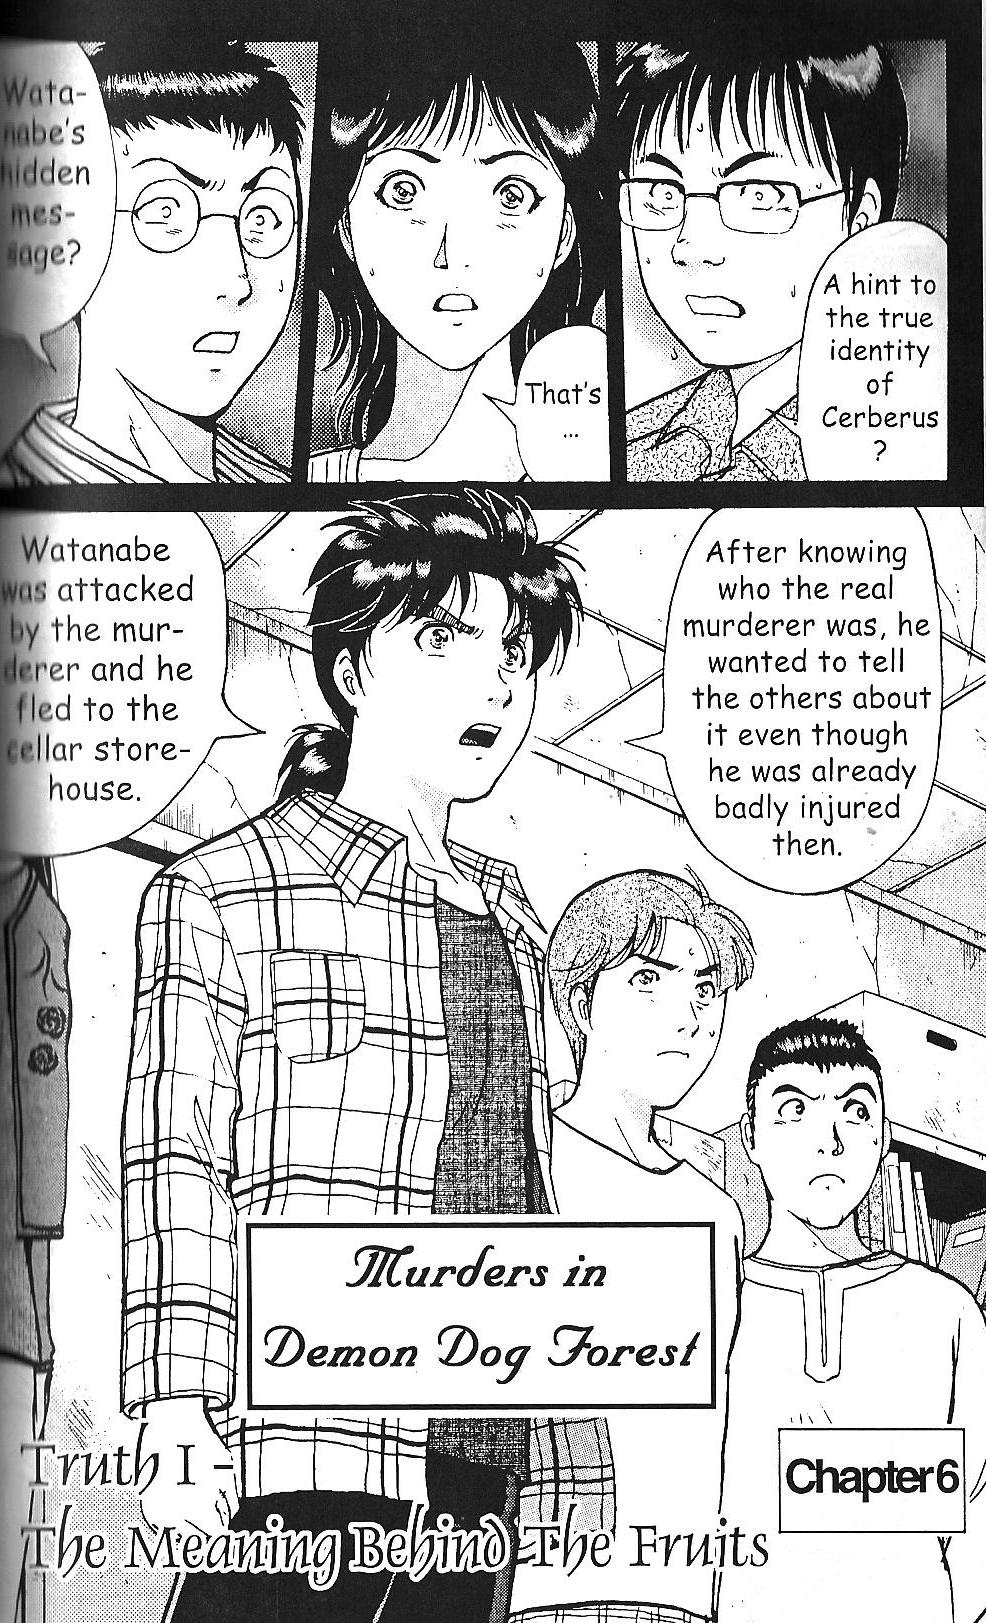 Kindaichi Shonen no Jikenbo Case Series Vol. 1 Ch. 6 Truth I The Meaning Behind The Fruits